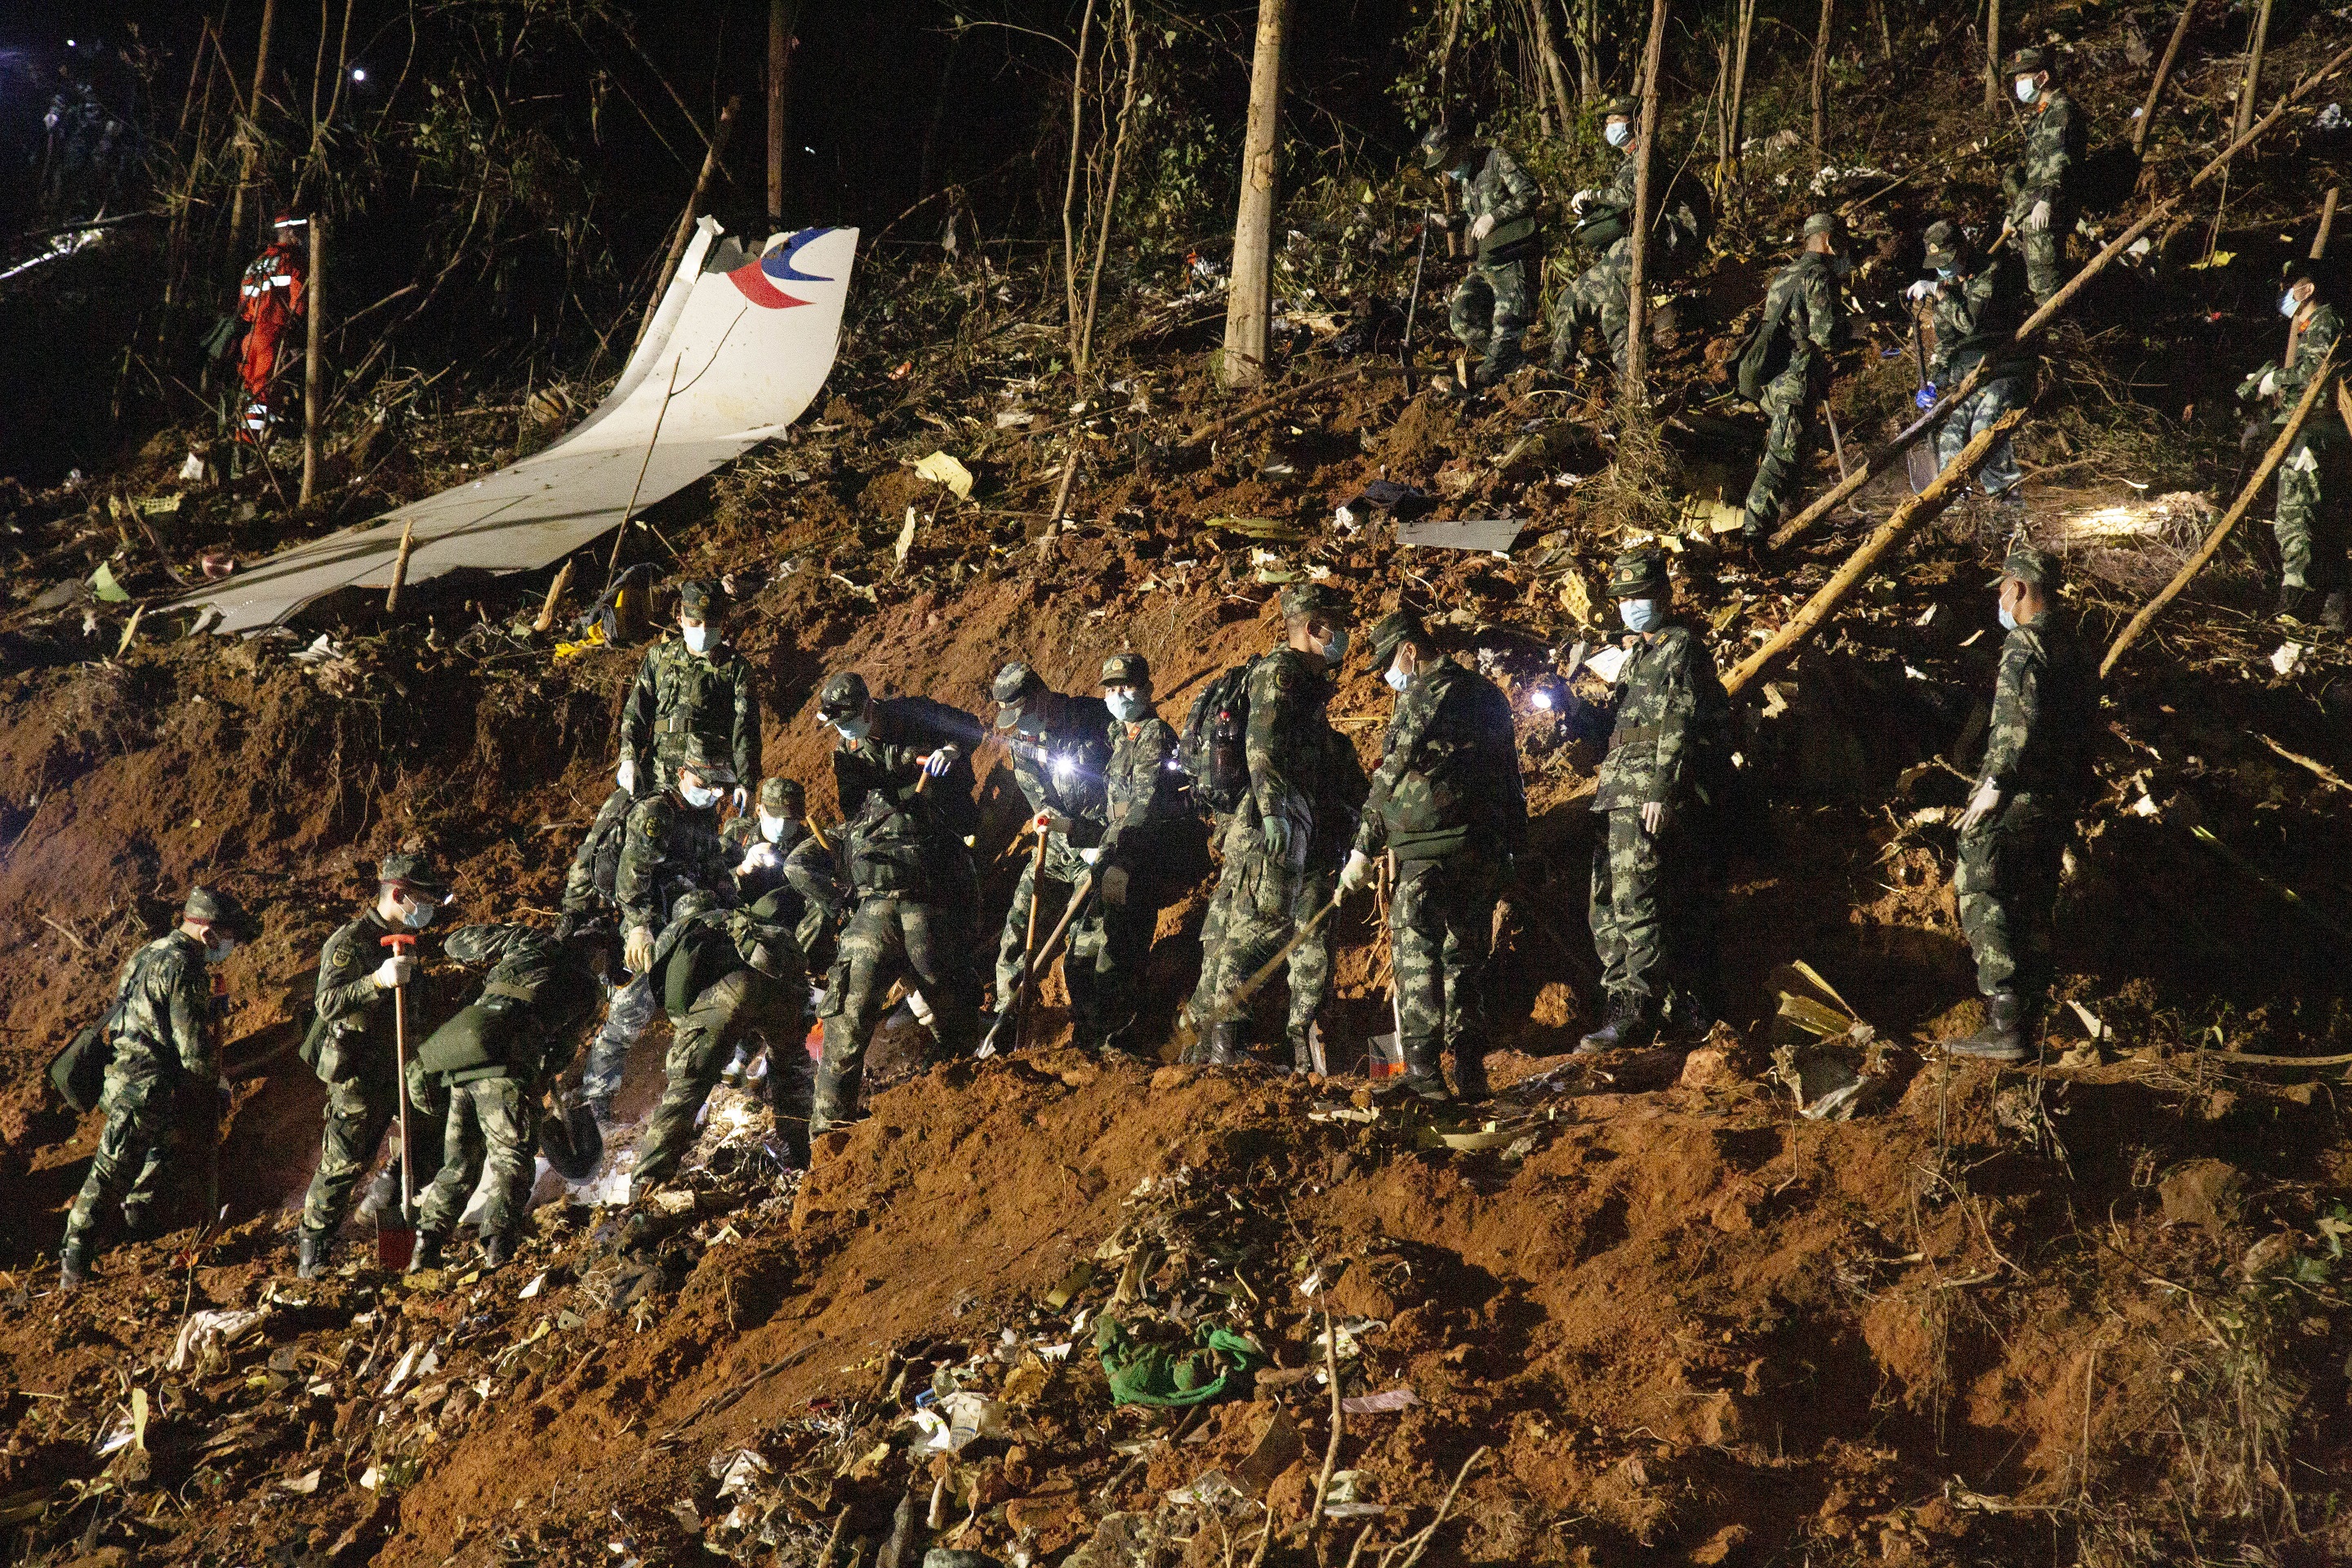 China Plane Crash: Regime Censors Information Amid Search for Victims